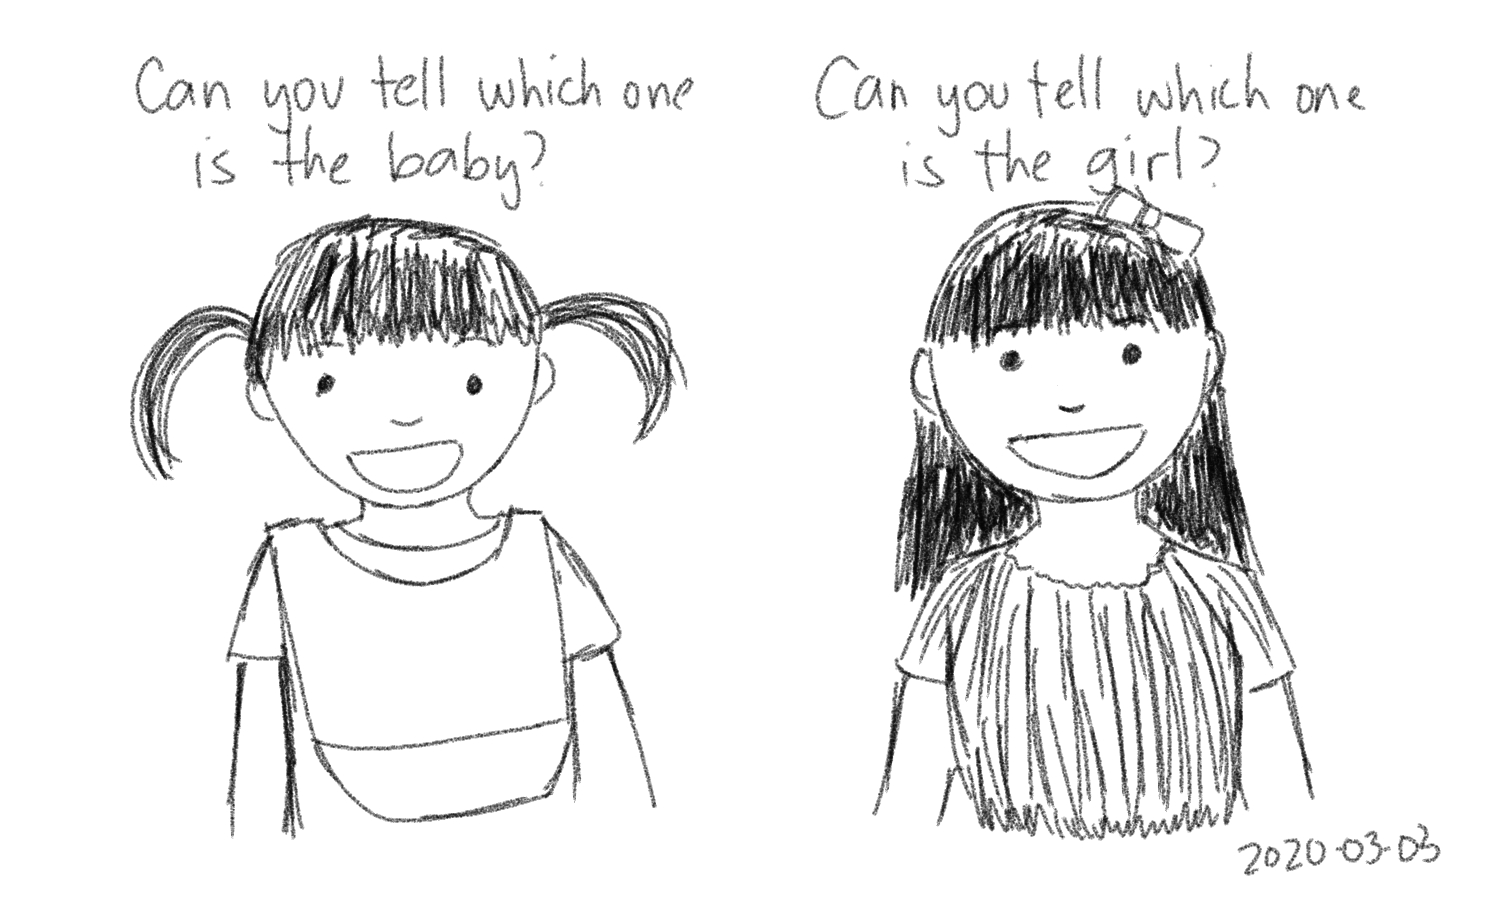 2020-03-03 Can you tell which one is the baby #moment #sketch.png